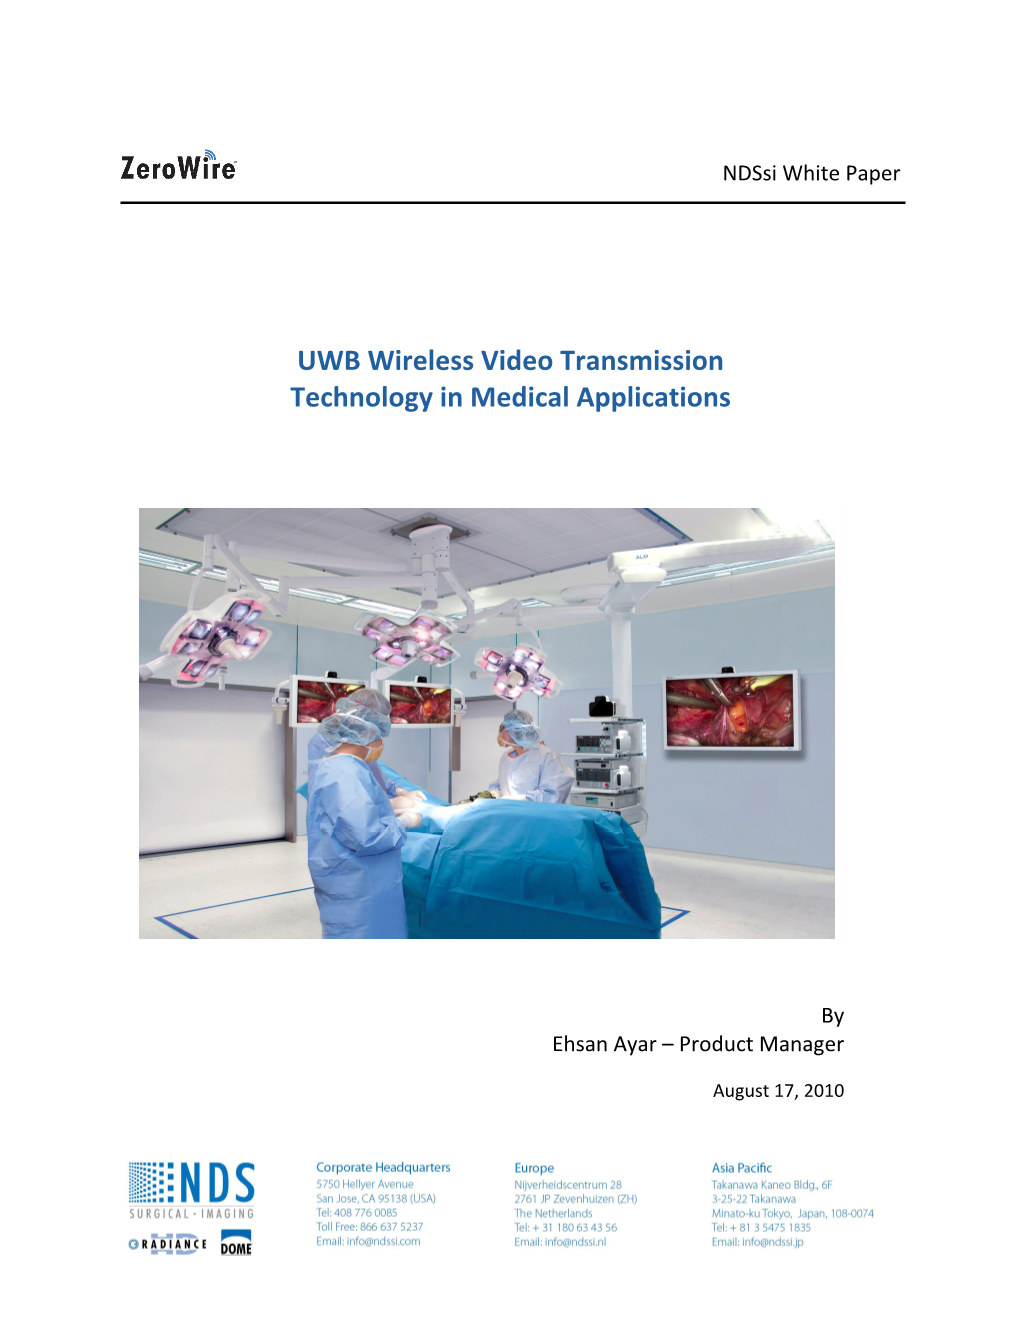 UWB Wireless Video Transmission Technology in Medical Applications